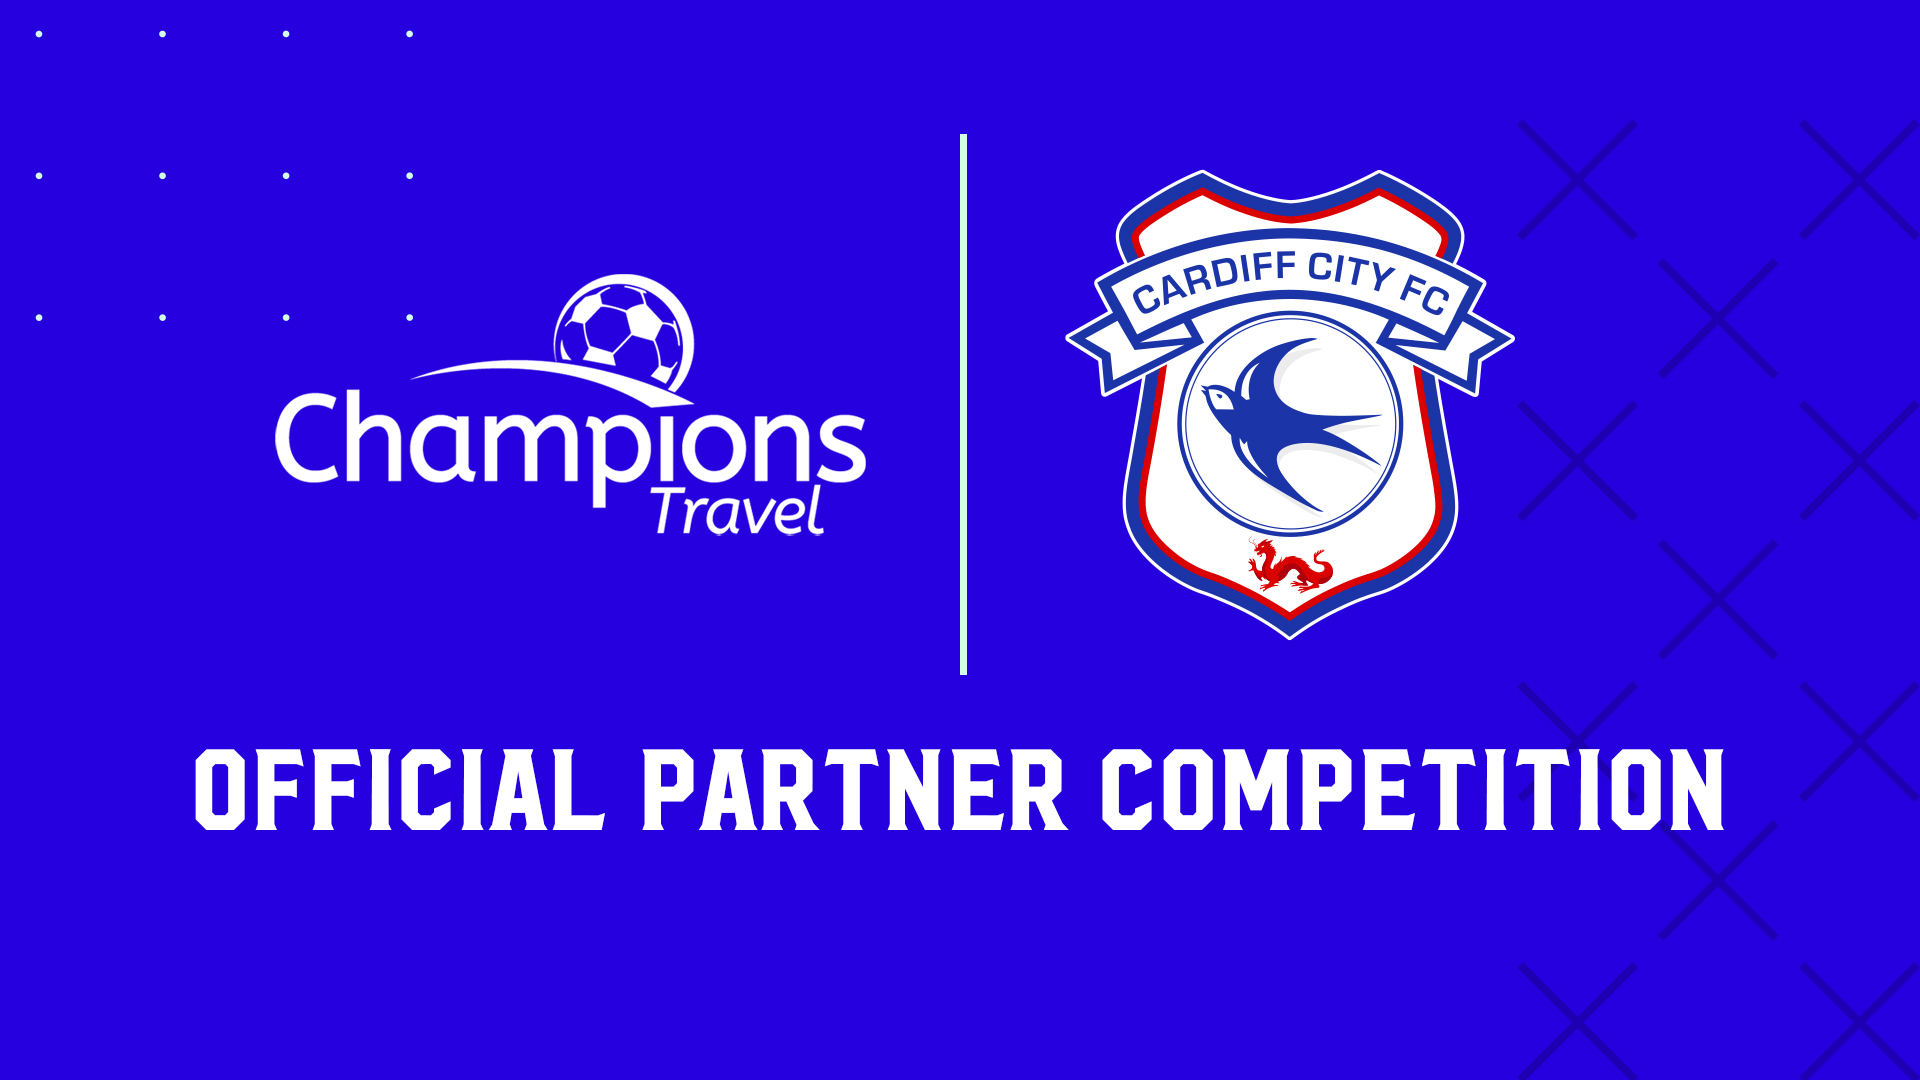 Champions Travel competition